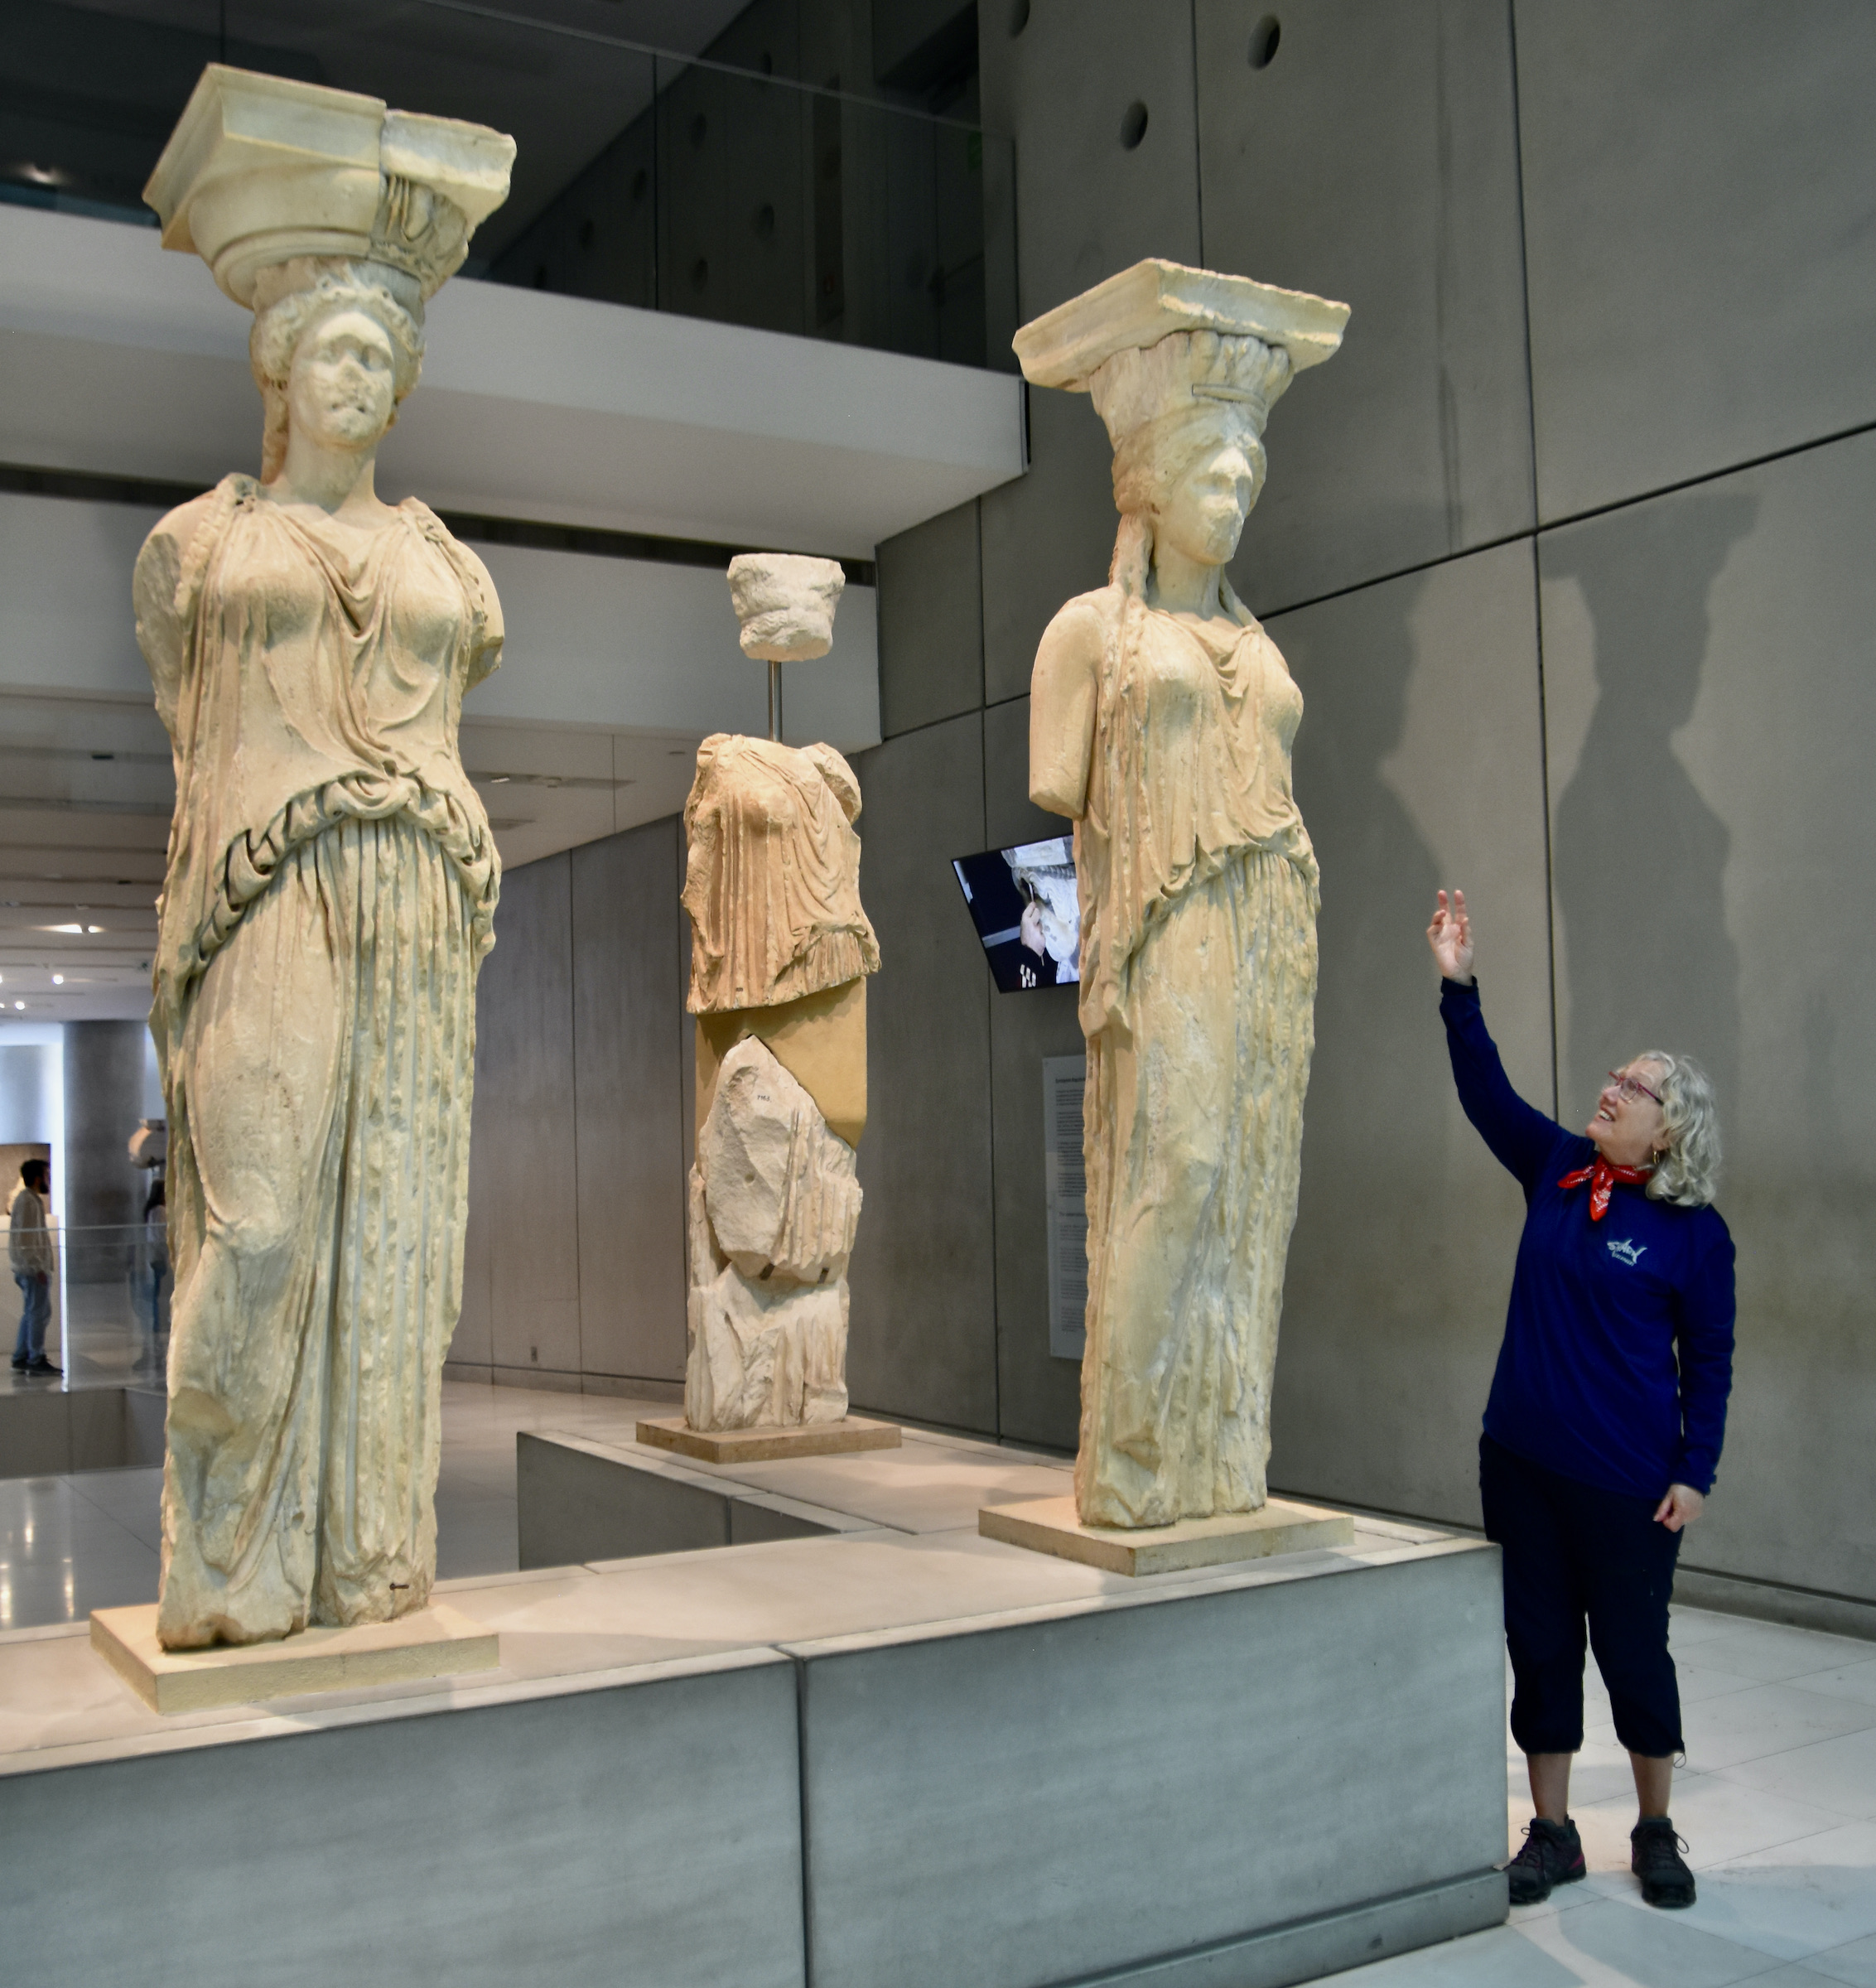 Alison with Three Caryatids, the Acropolis Museum